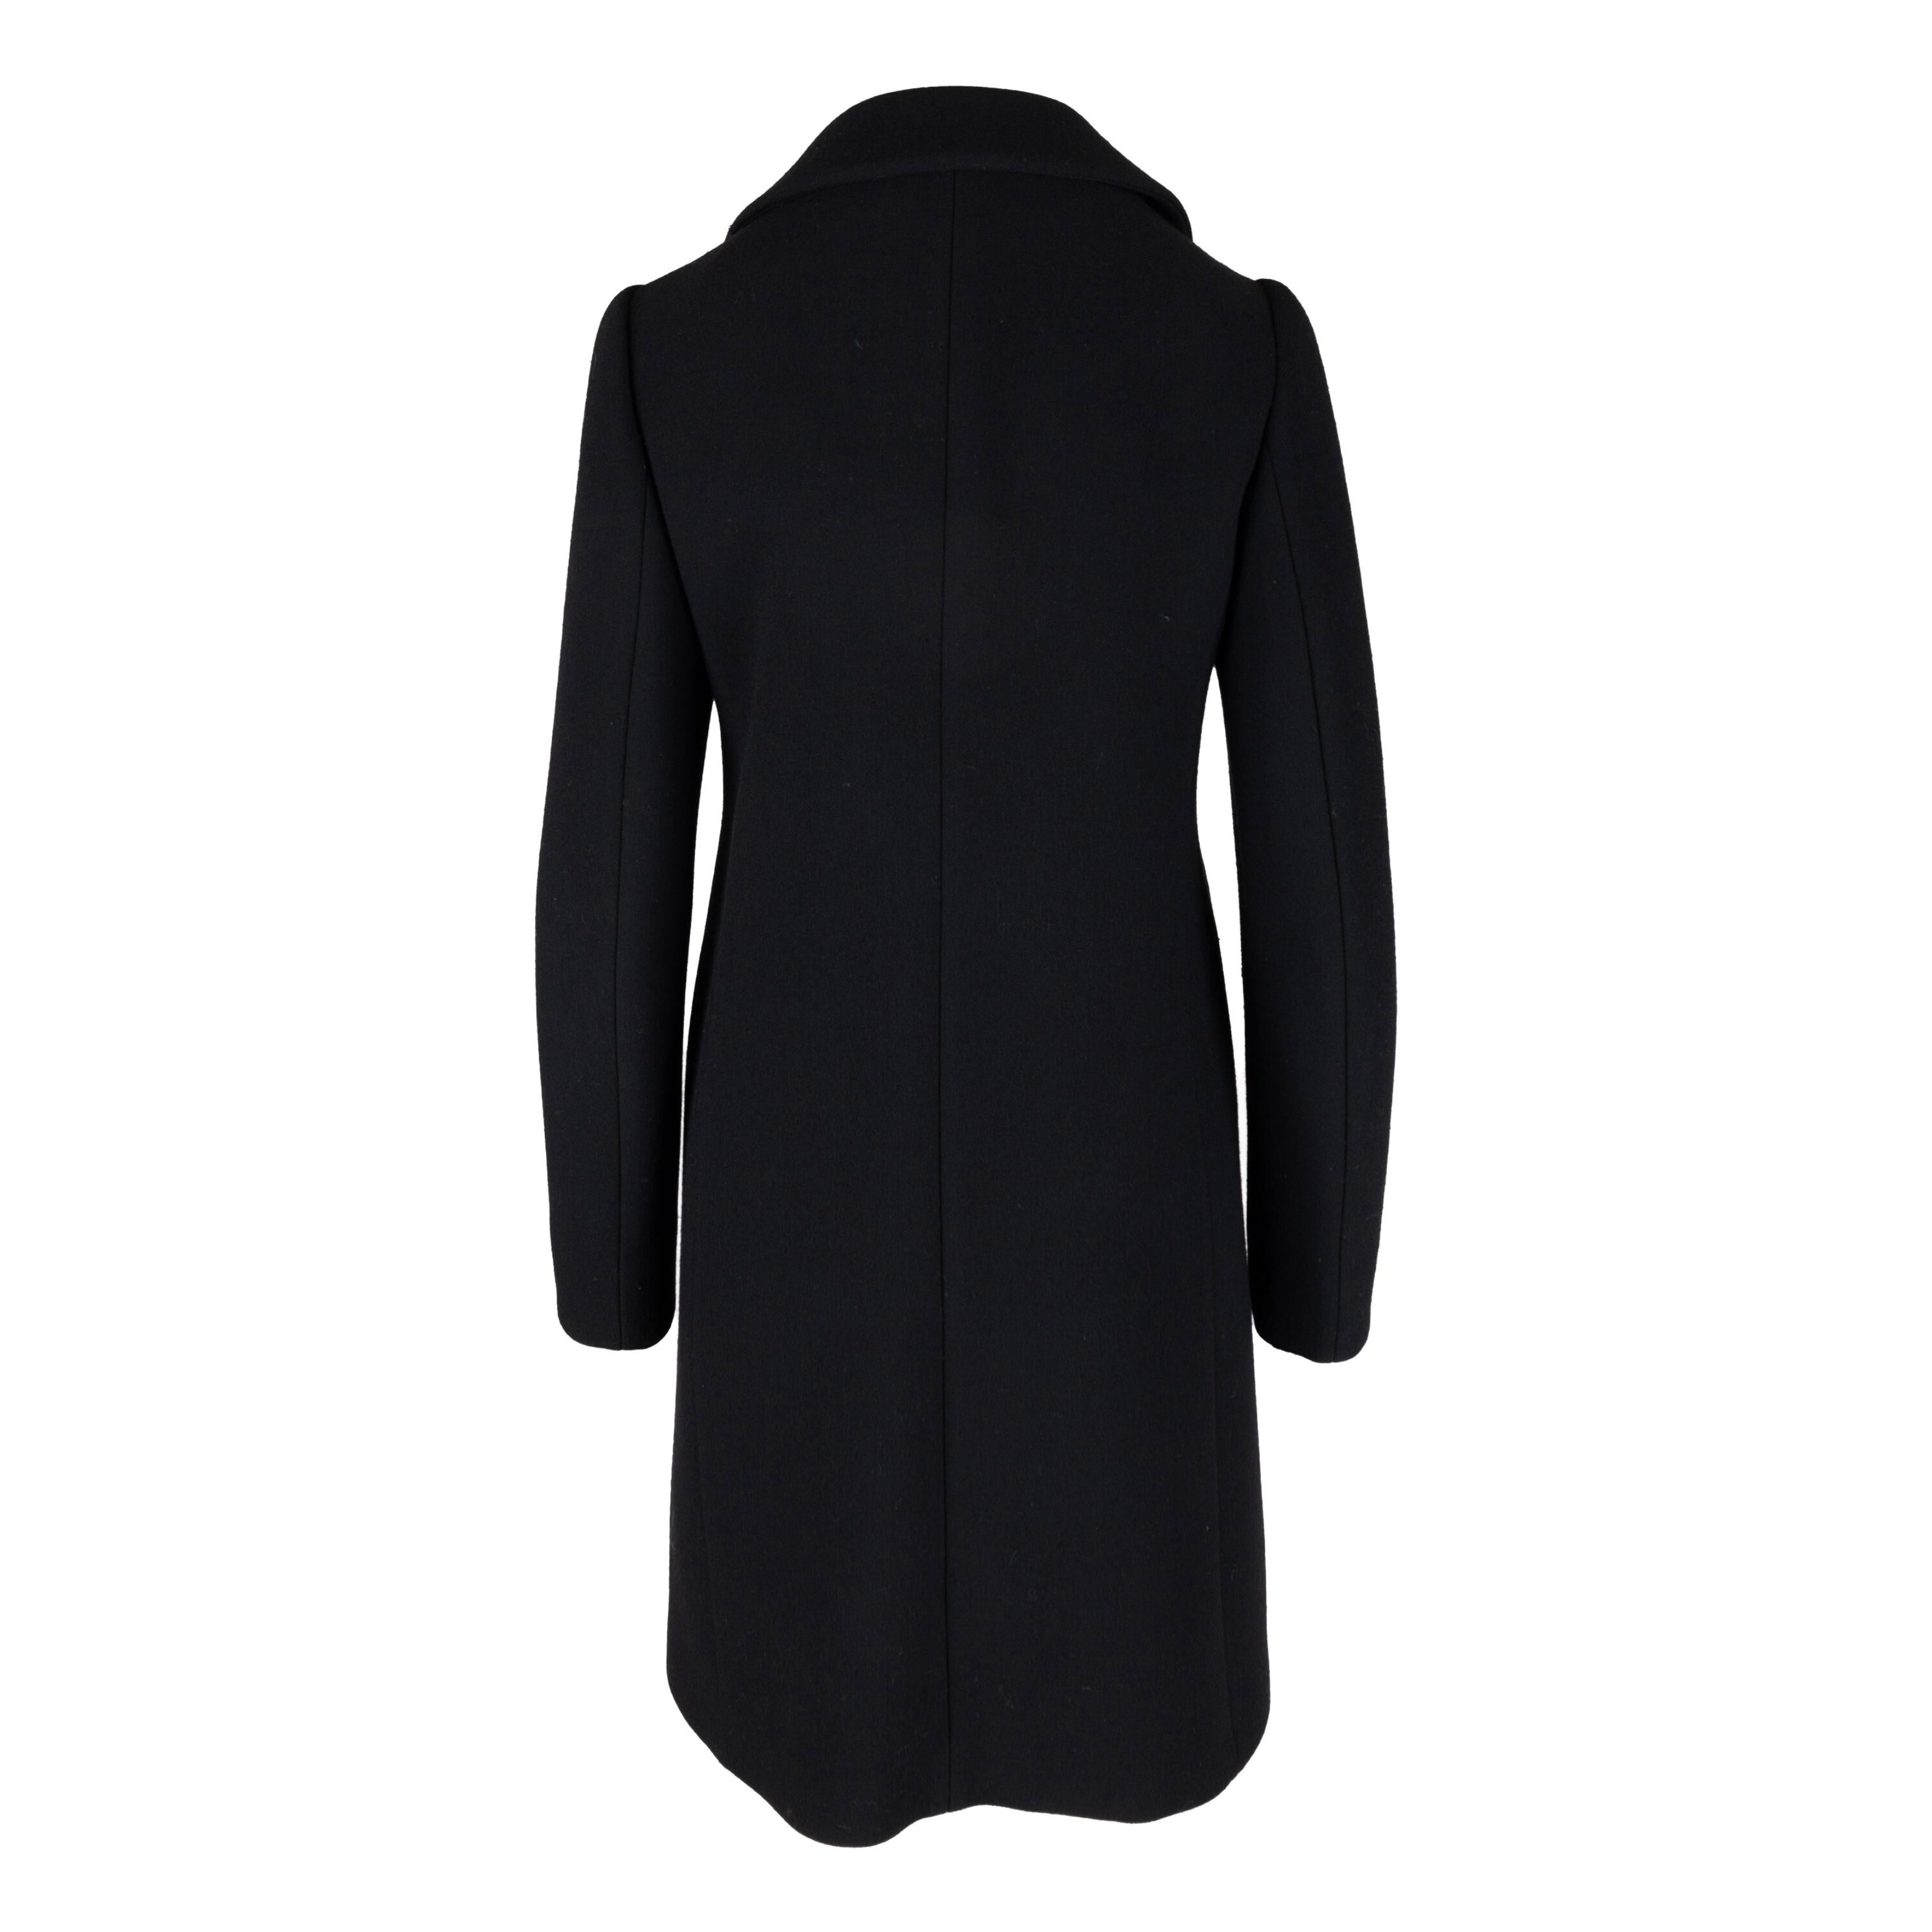 This Prada coat is expertly crafted from virgin wool and is embellished with intricately detailed embroidered appliqués for a truly luxurious finish. Its classic silhouette, collar, and button front closure provide comfort and functionality, while